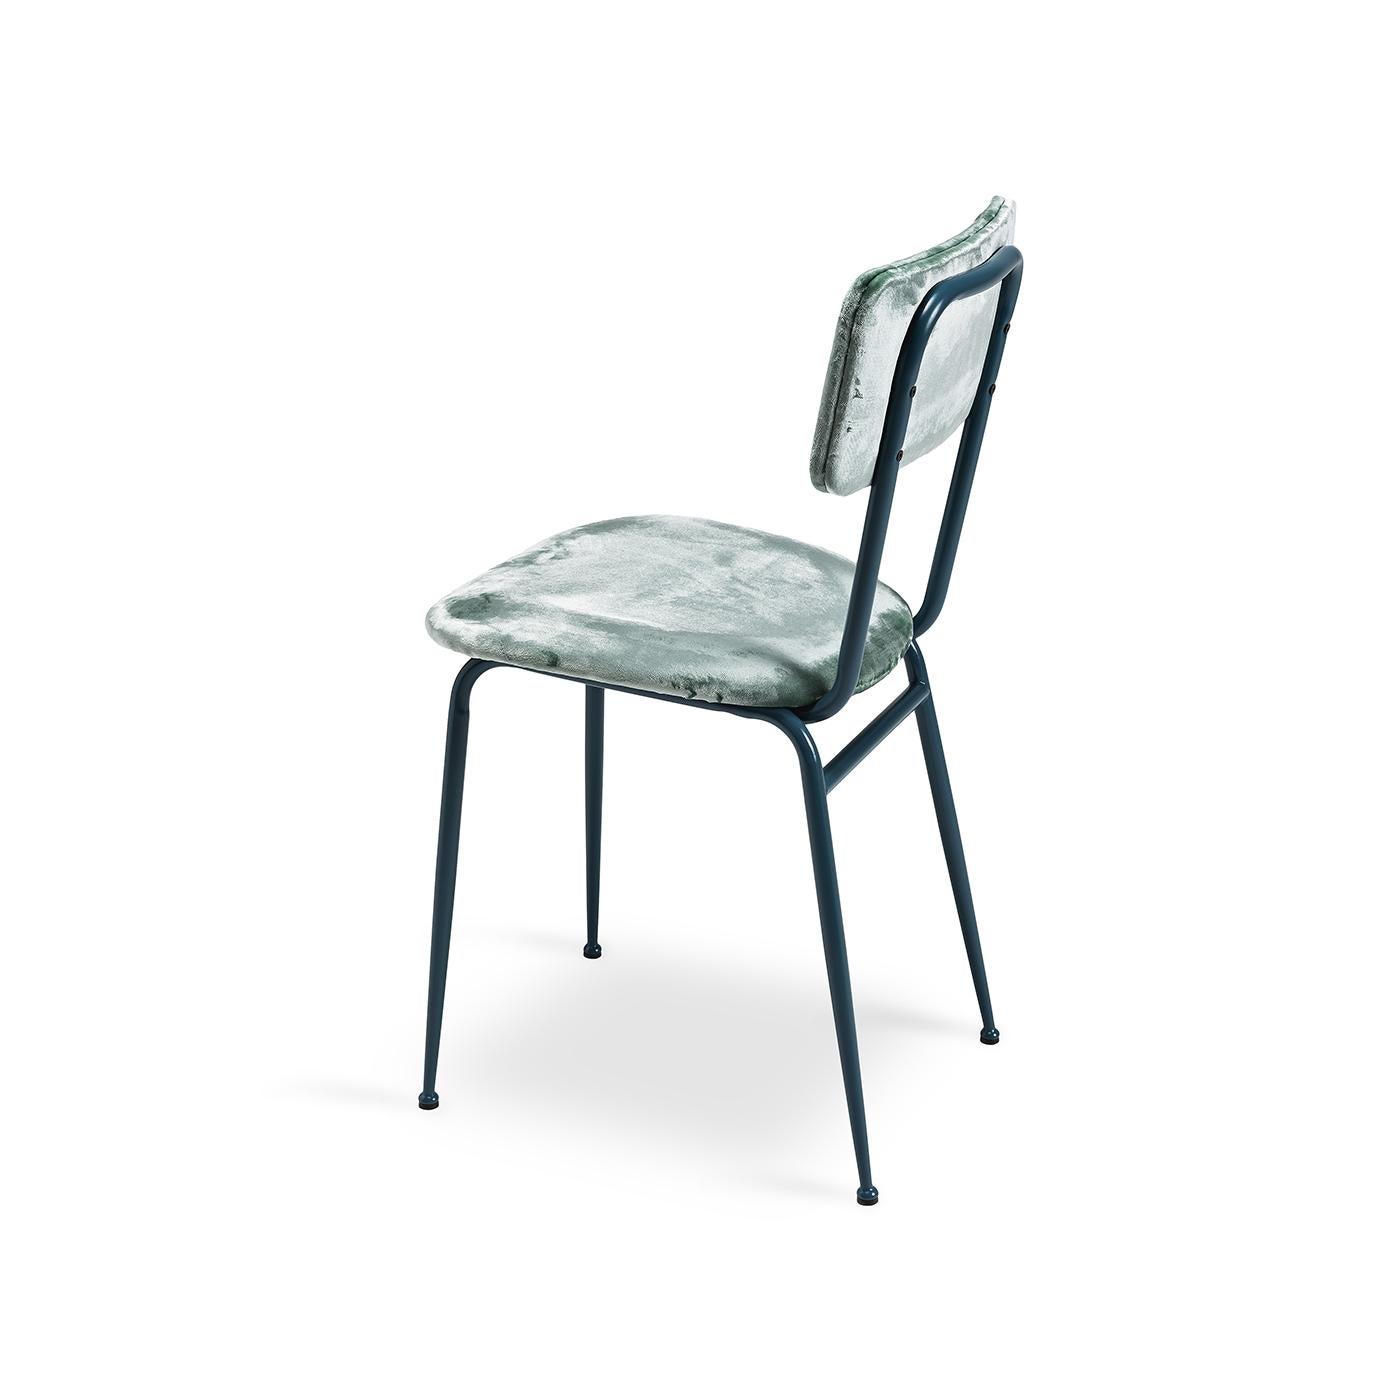 The Miss Gina 3 chair boasts a sleek metal frame with a matt avio blue lacquered finish. Upholstered in turquoise velvet for a streamlined yet statement aesthetic, its padded seat and backrest offer optimal comfort. The perfect way to add an instant